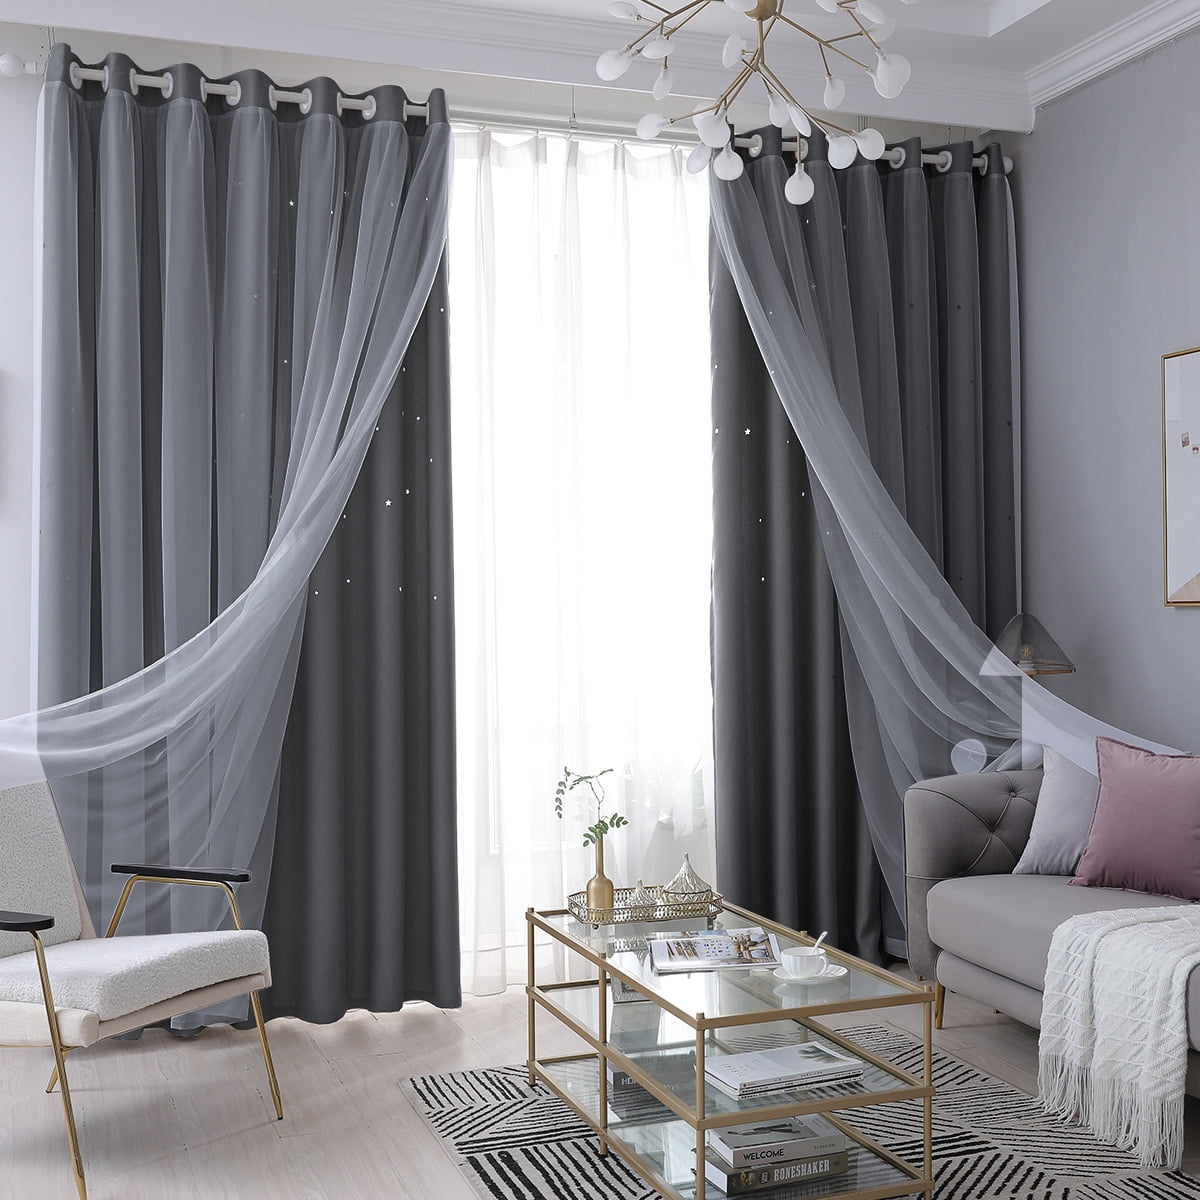 Details about   1/2 Panels Window Curtain Double-Layer Yarn Tulle Overlay Stars Drapes Eyelet 